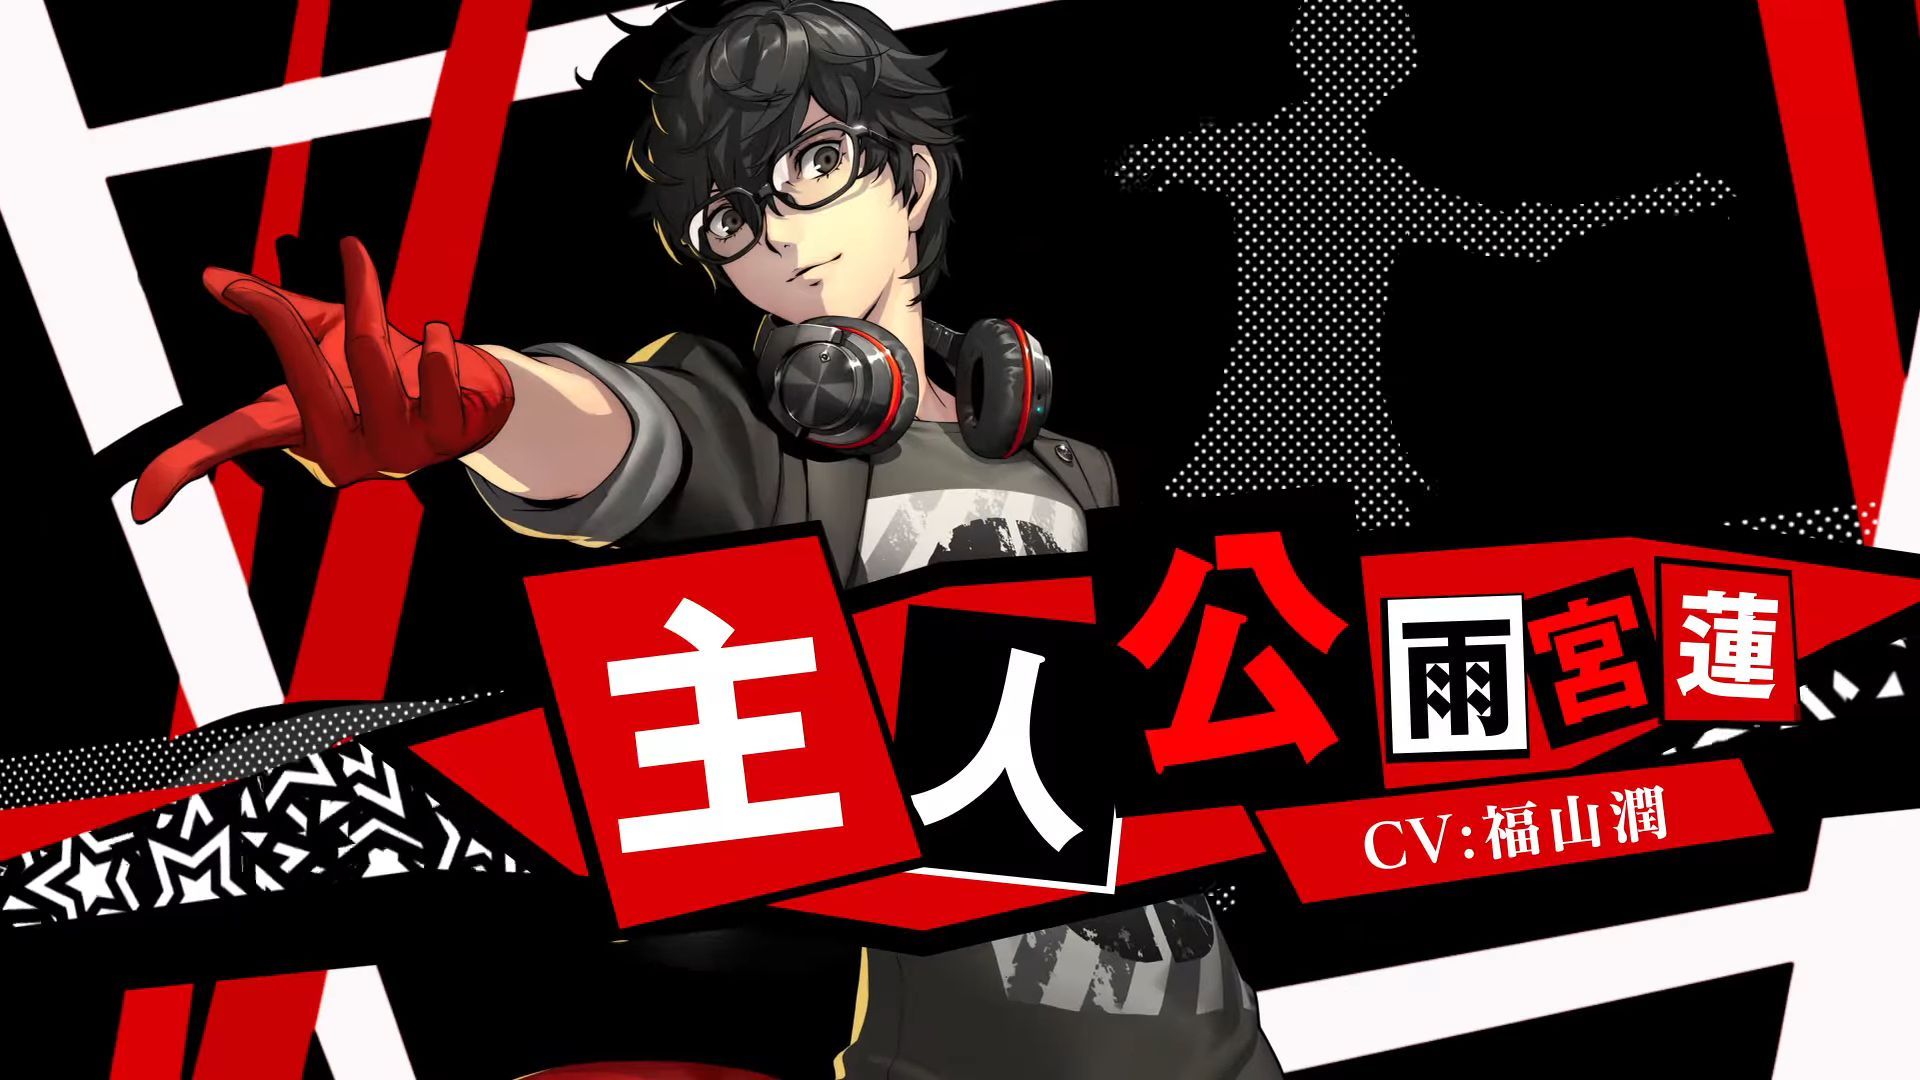 Persona 5 Dancing Star Night and 3 Dancing Moon Night Gets New Trailers ...